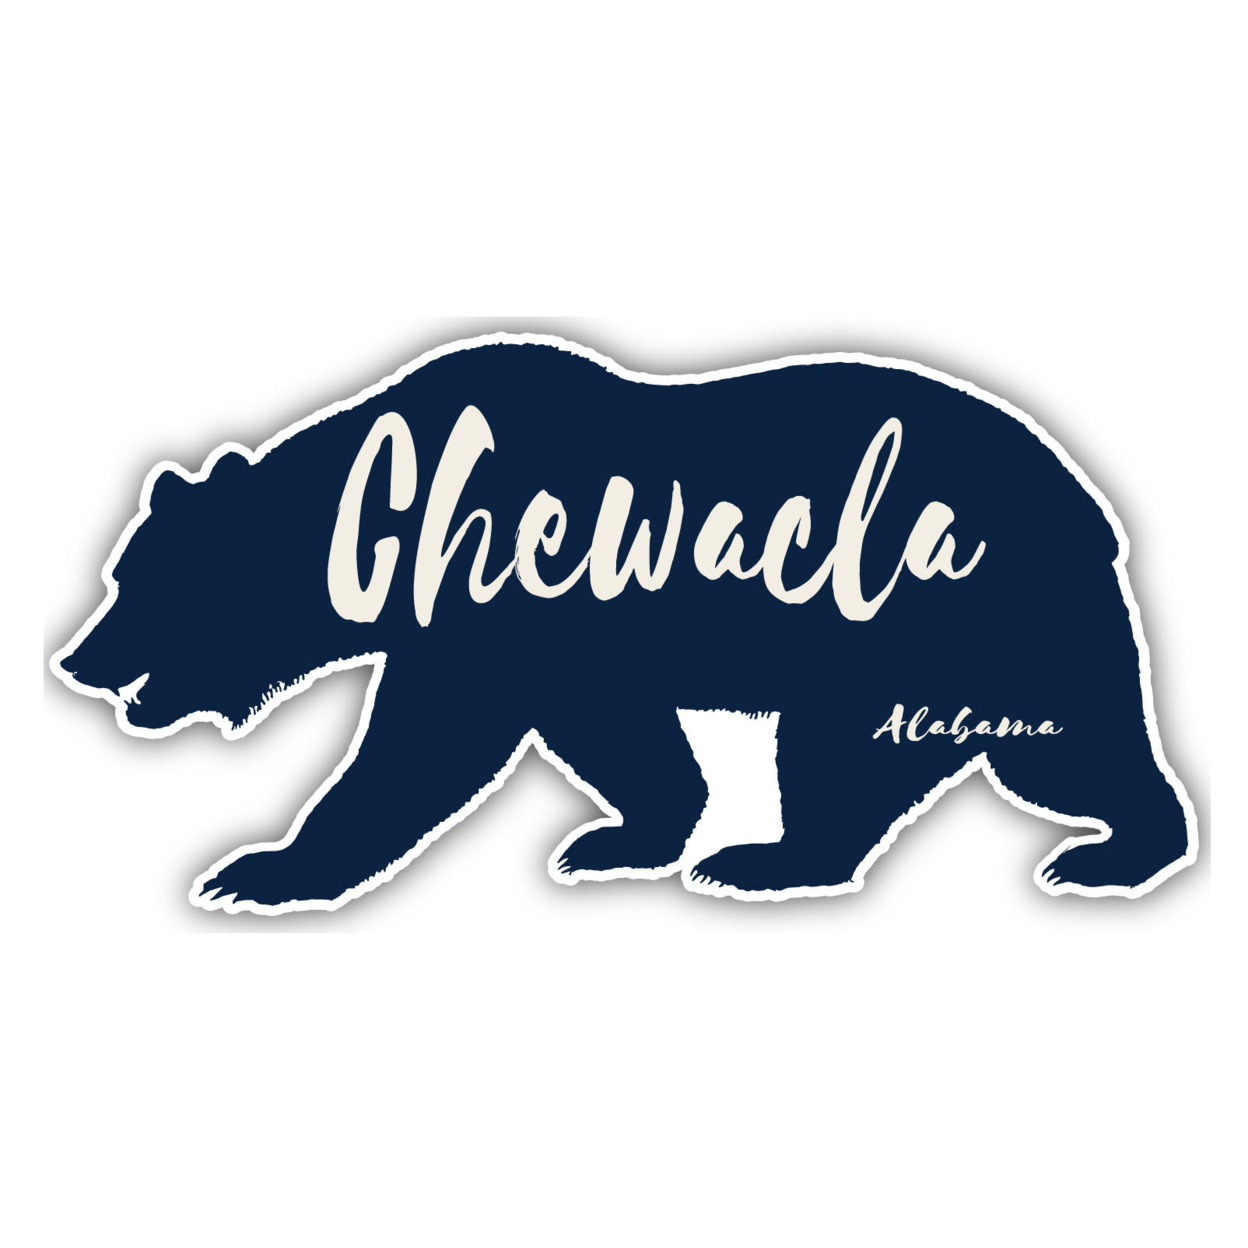 Chewacla Alabama Souvenir Decorative Stickers (Choose Theme And Size) - 4-Pack, 4-Inch, Bear